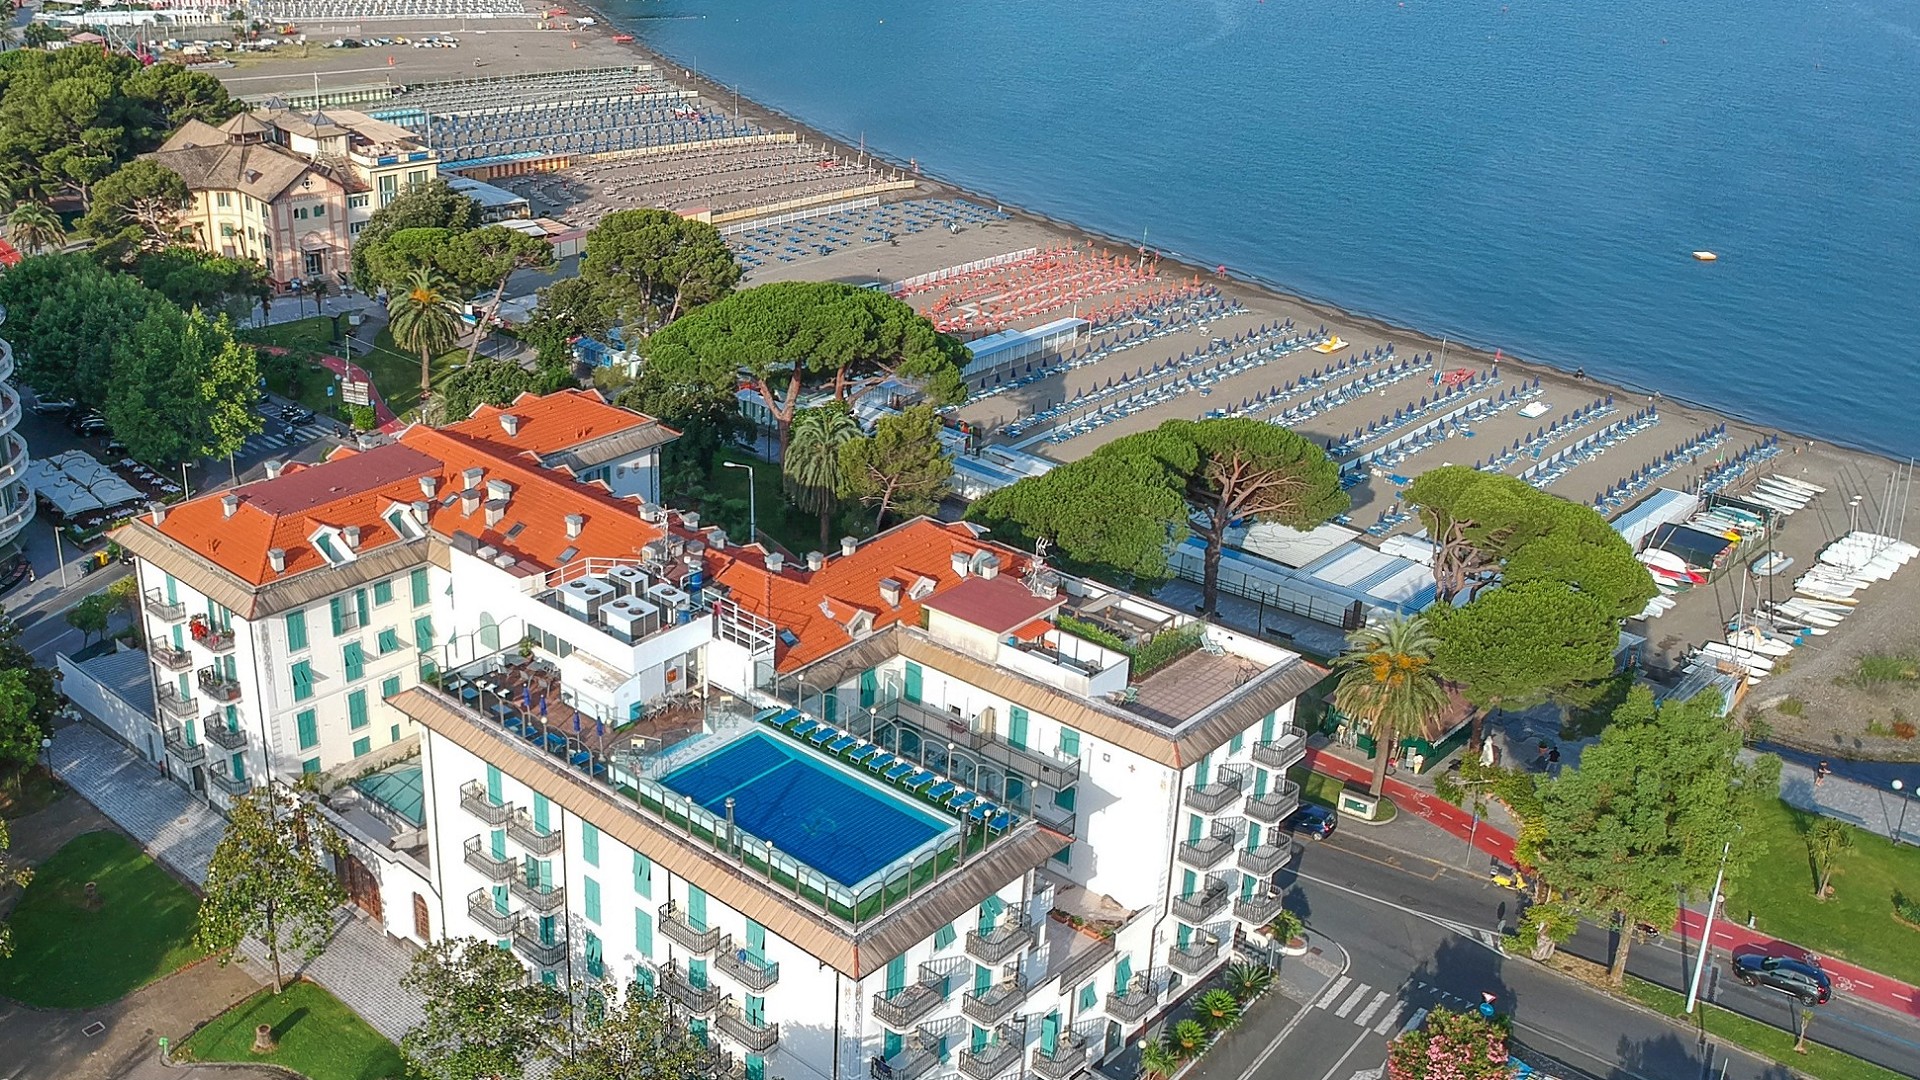 This Iconic Hotel on the Italian Riviera Reopens in June With a